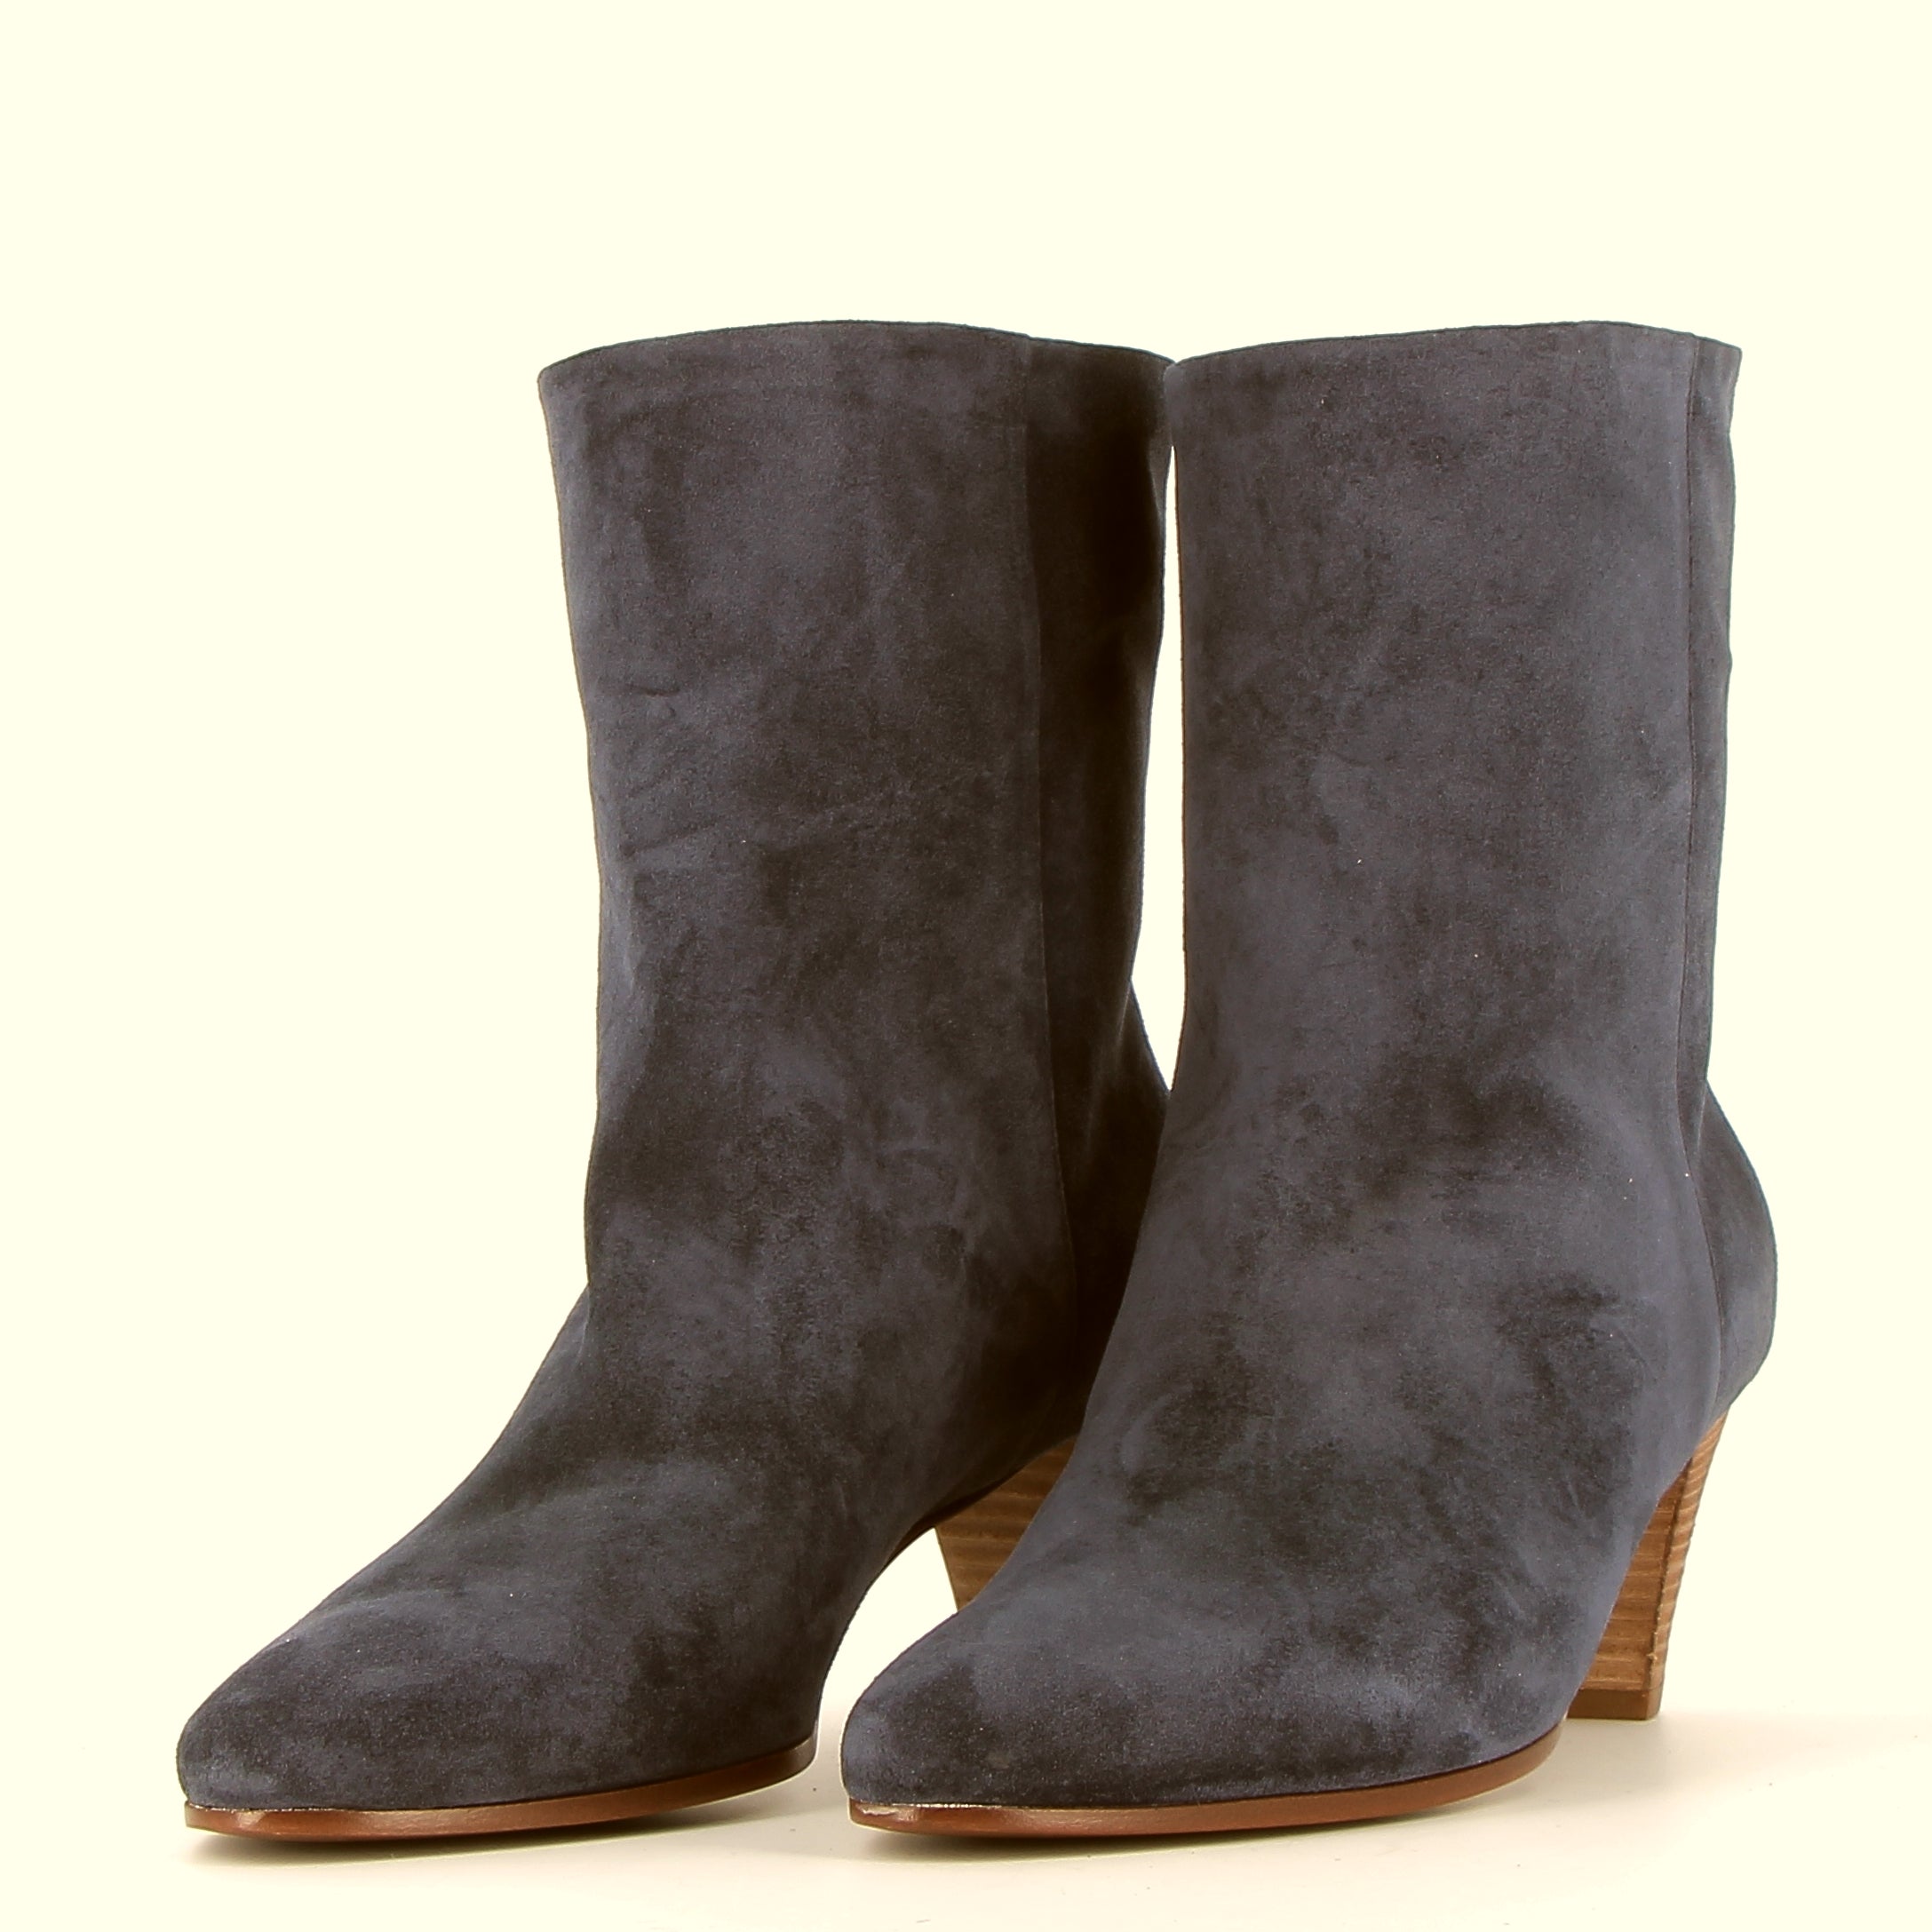 Cobalt blue suede ankle boot